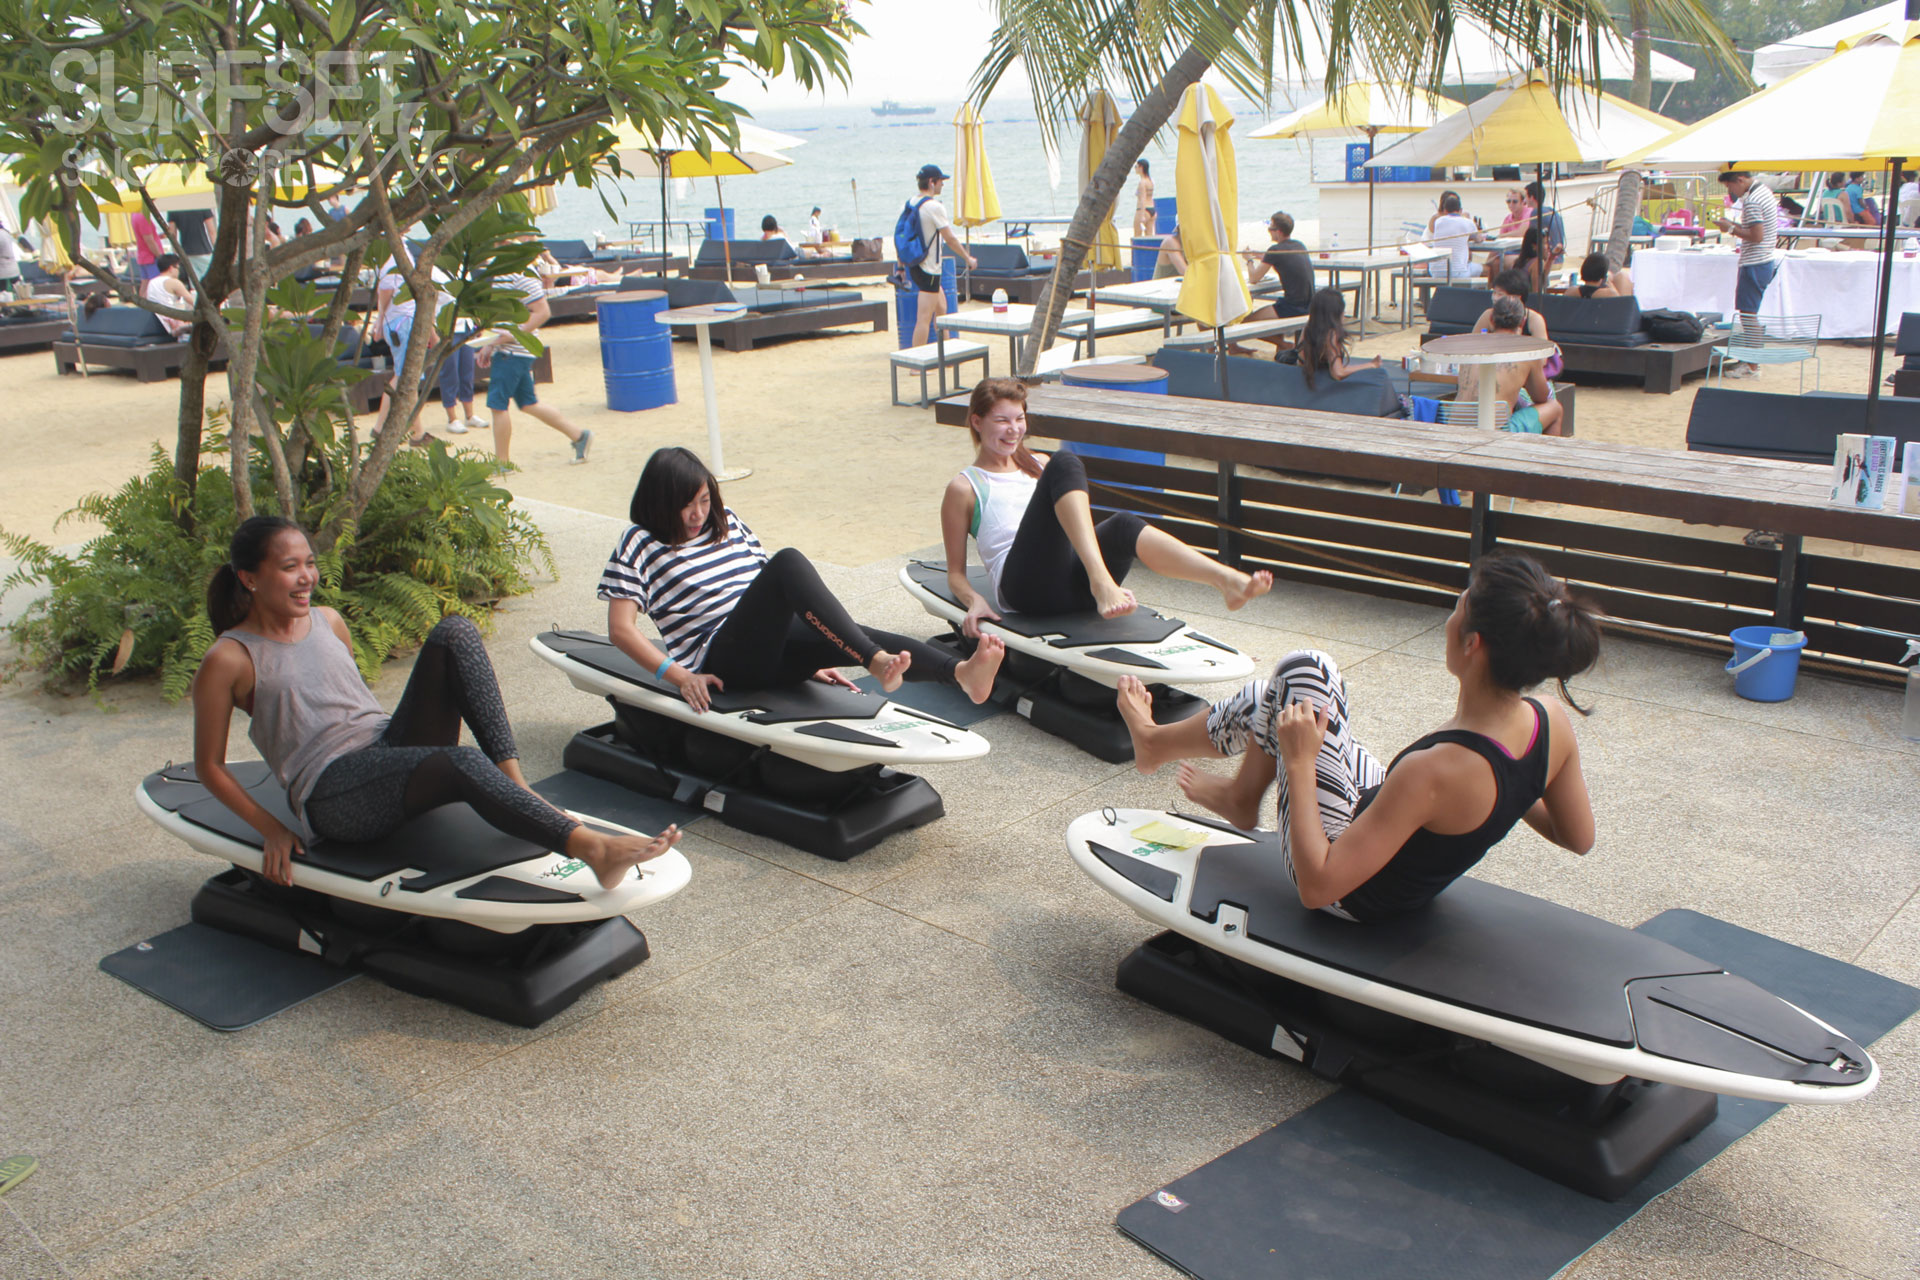 Doing HIIT on Surfset board during Soulscape Yoga Event